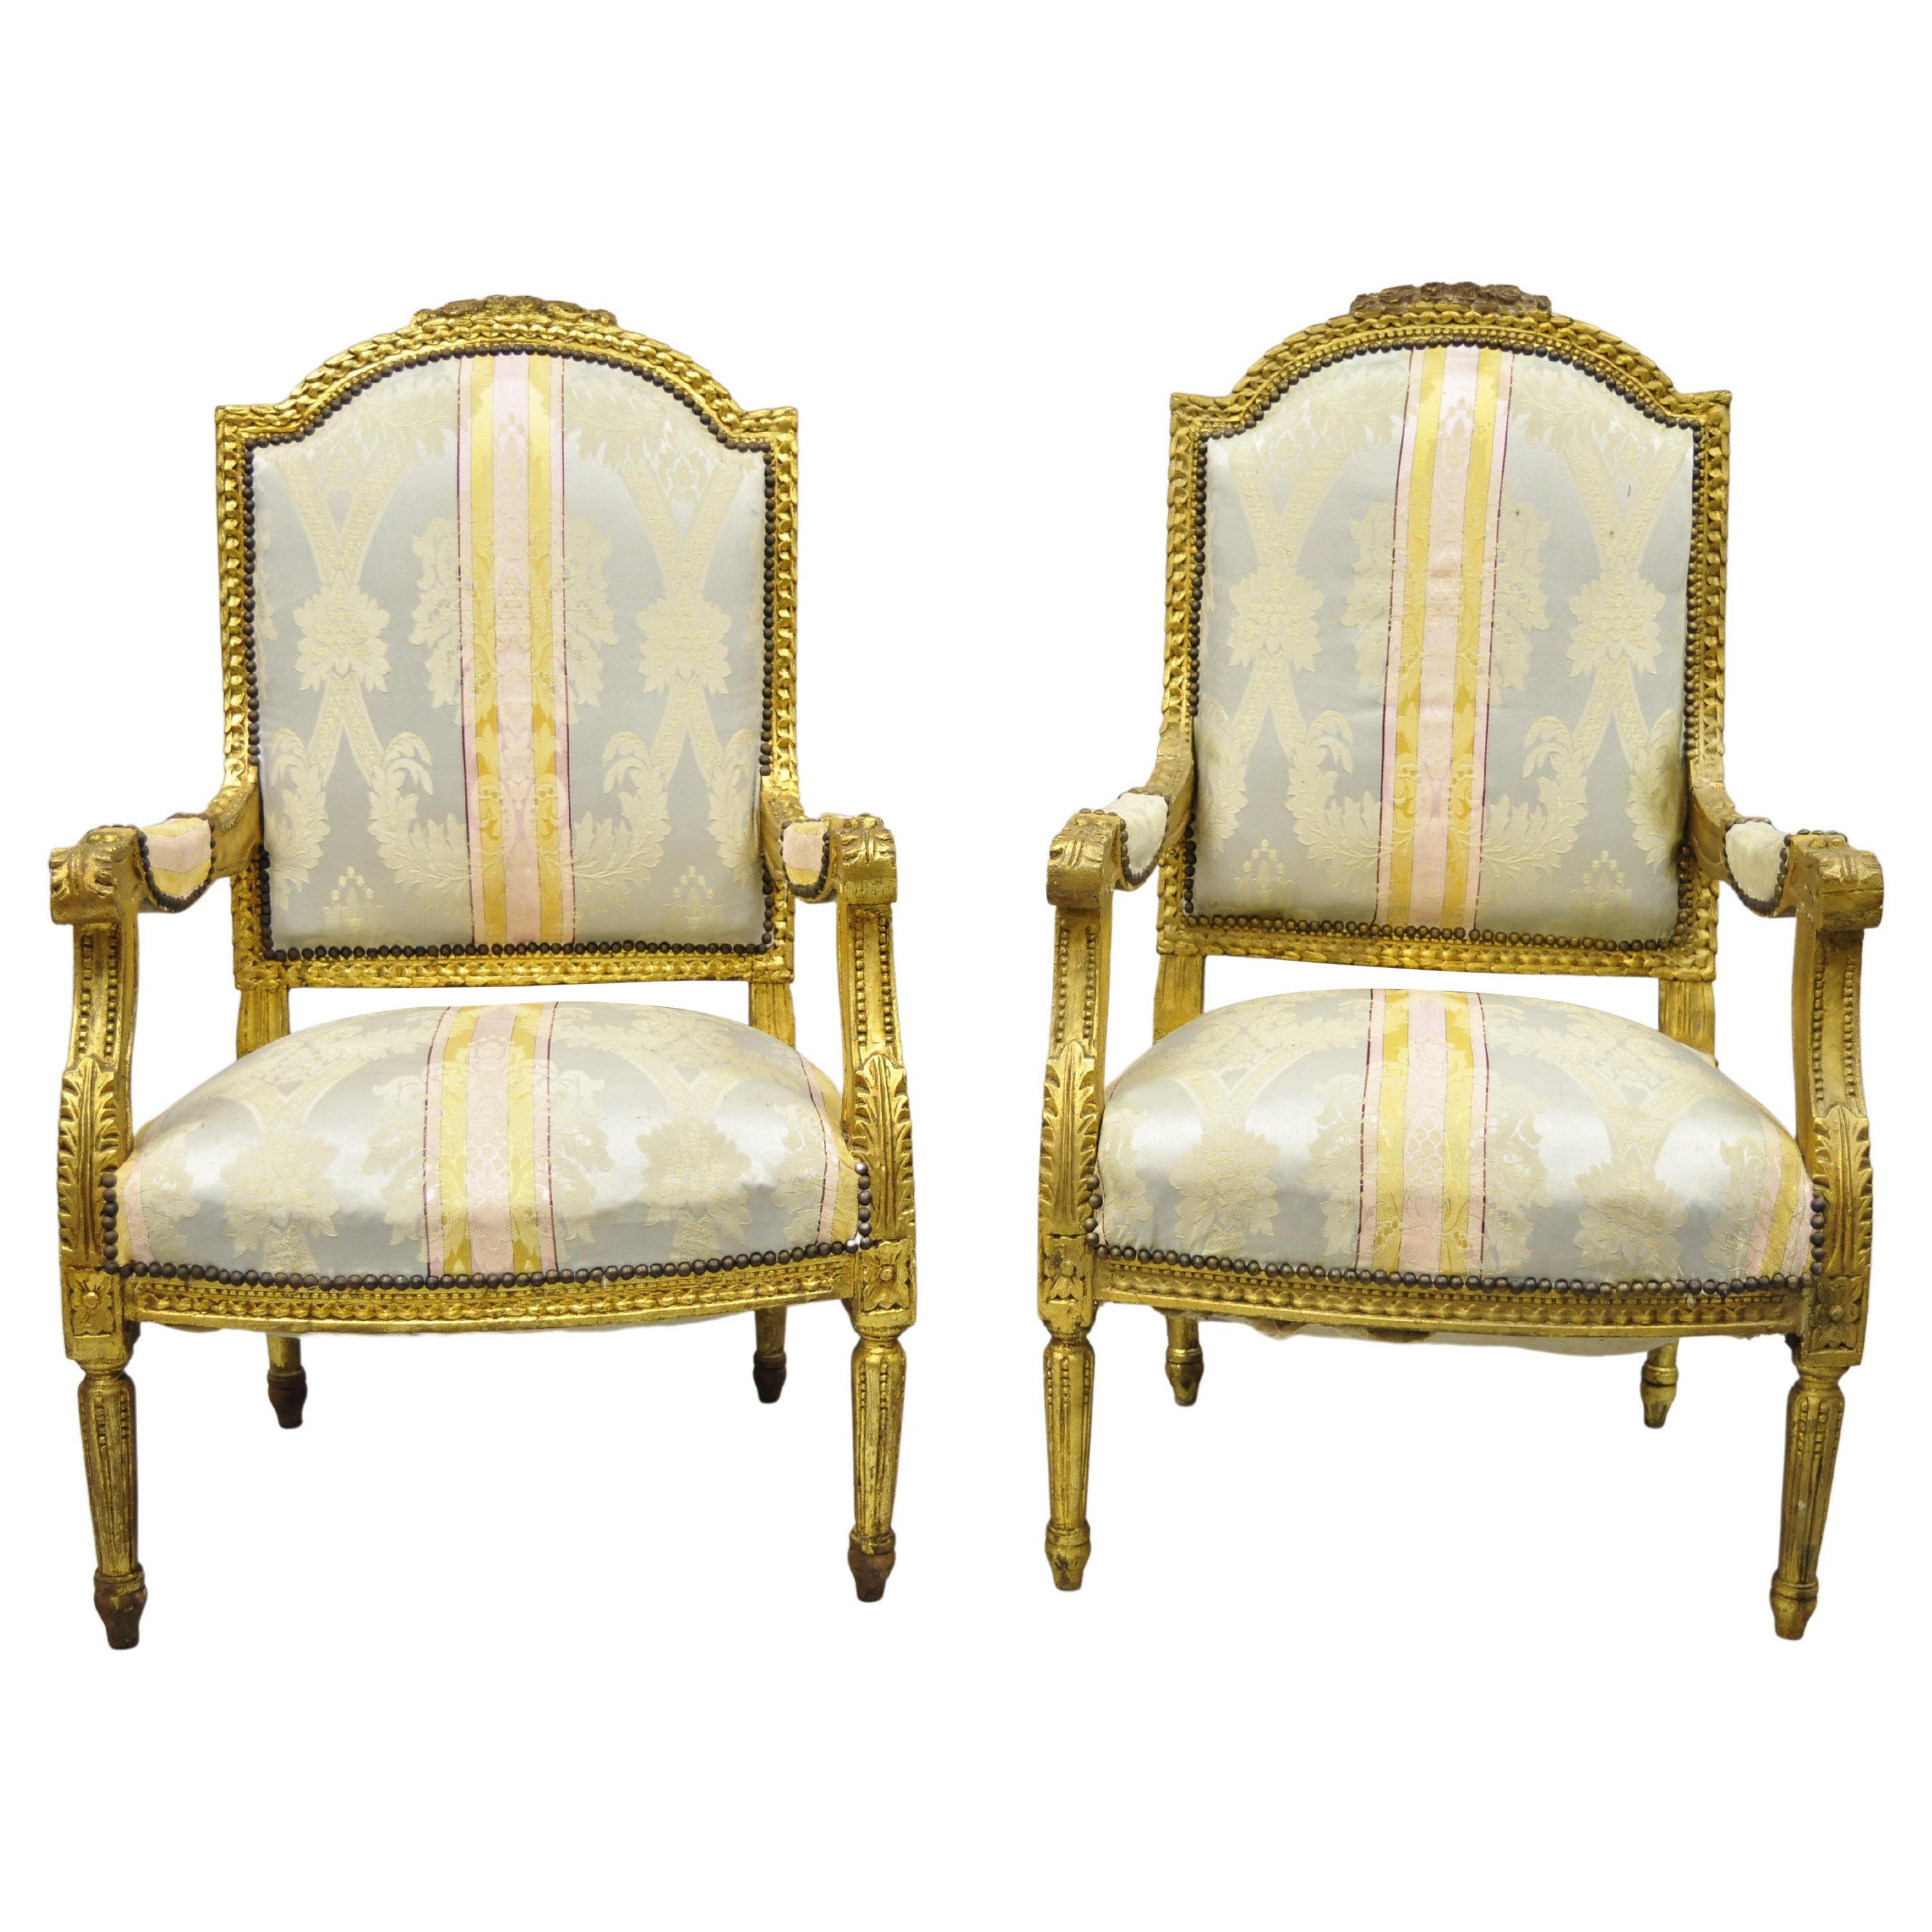 Vintage French Louis XVI Gold Giltwood Upholstered Lounge Chairs 'B', a Pair For Sale